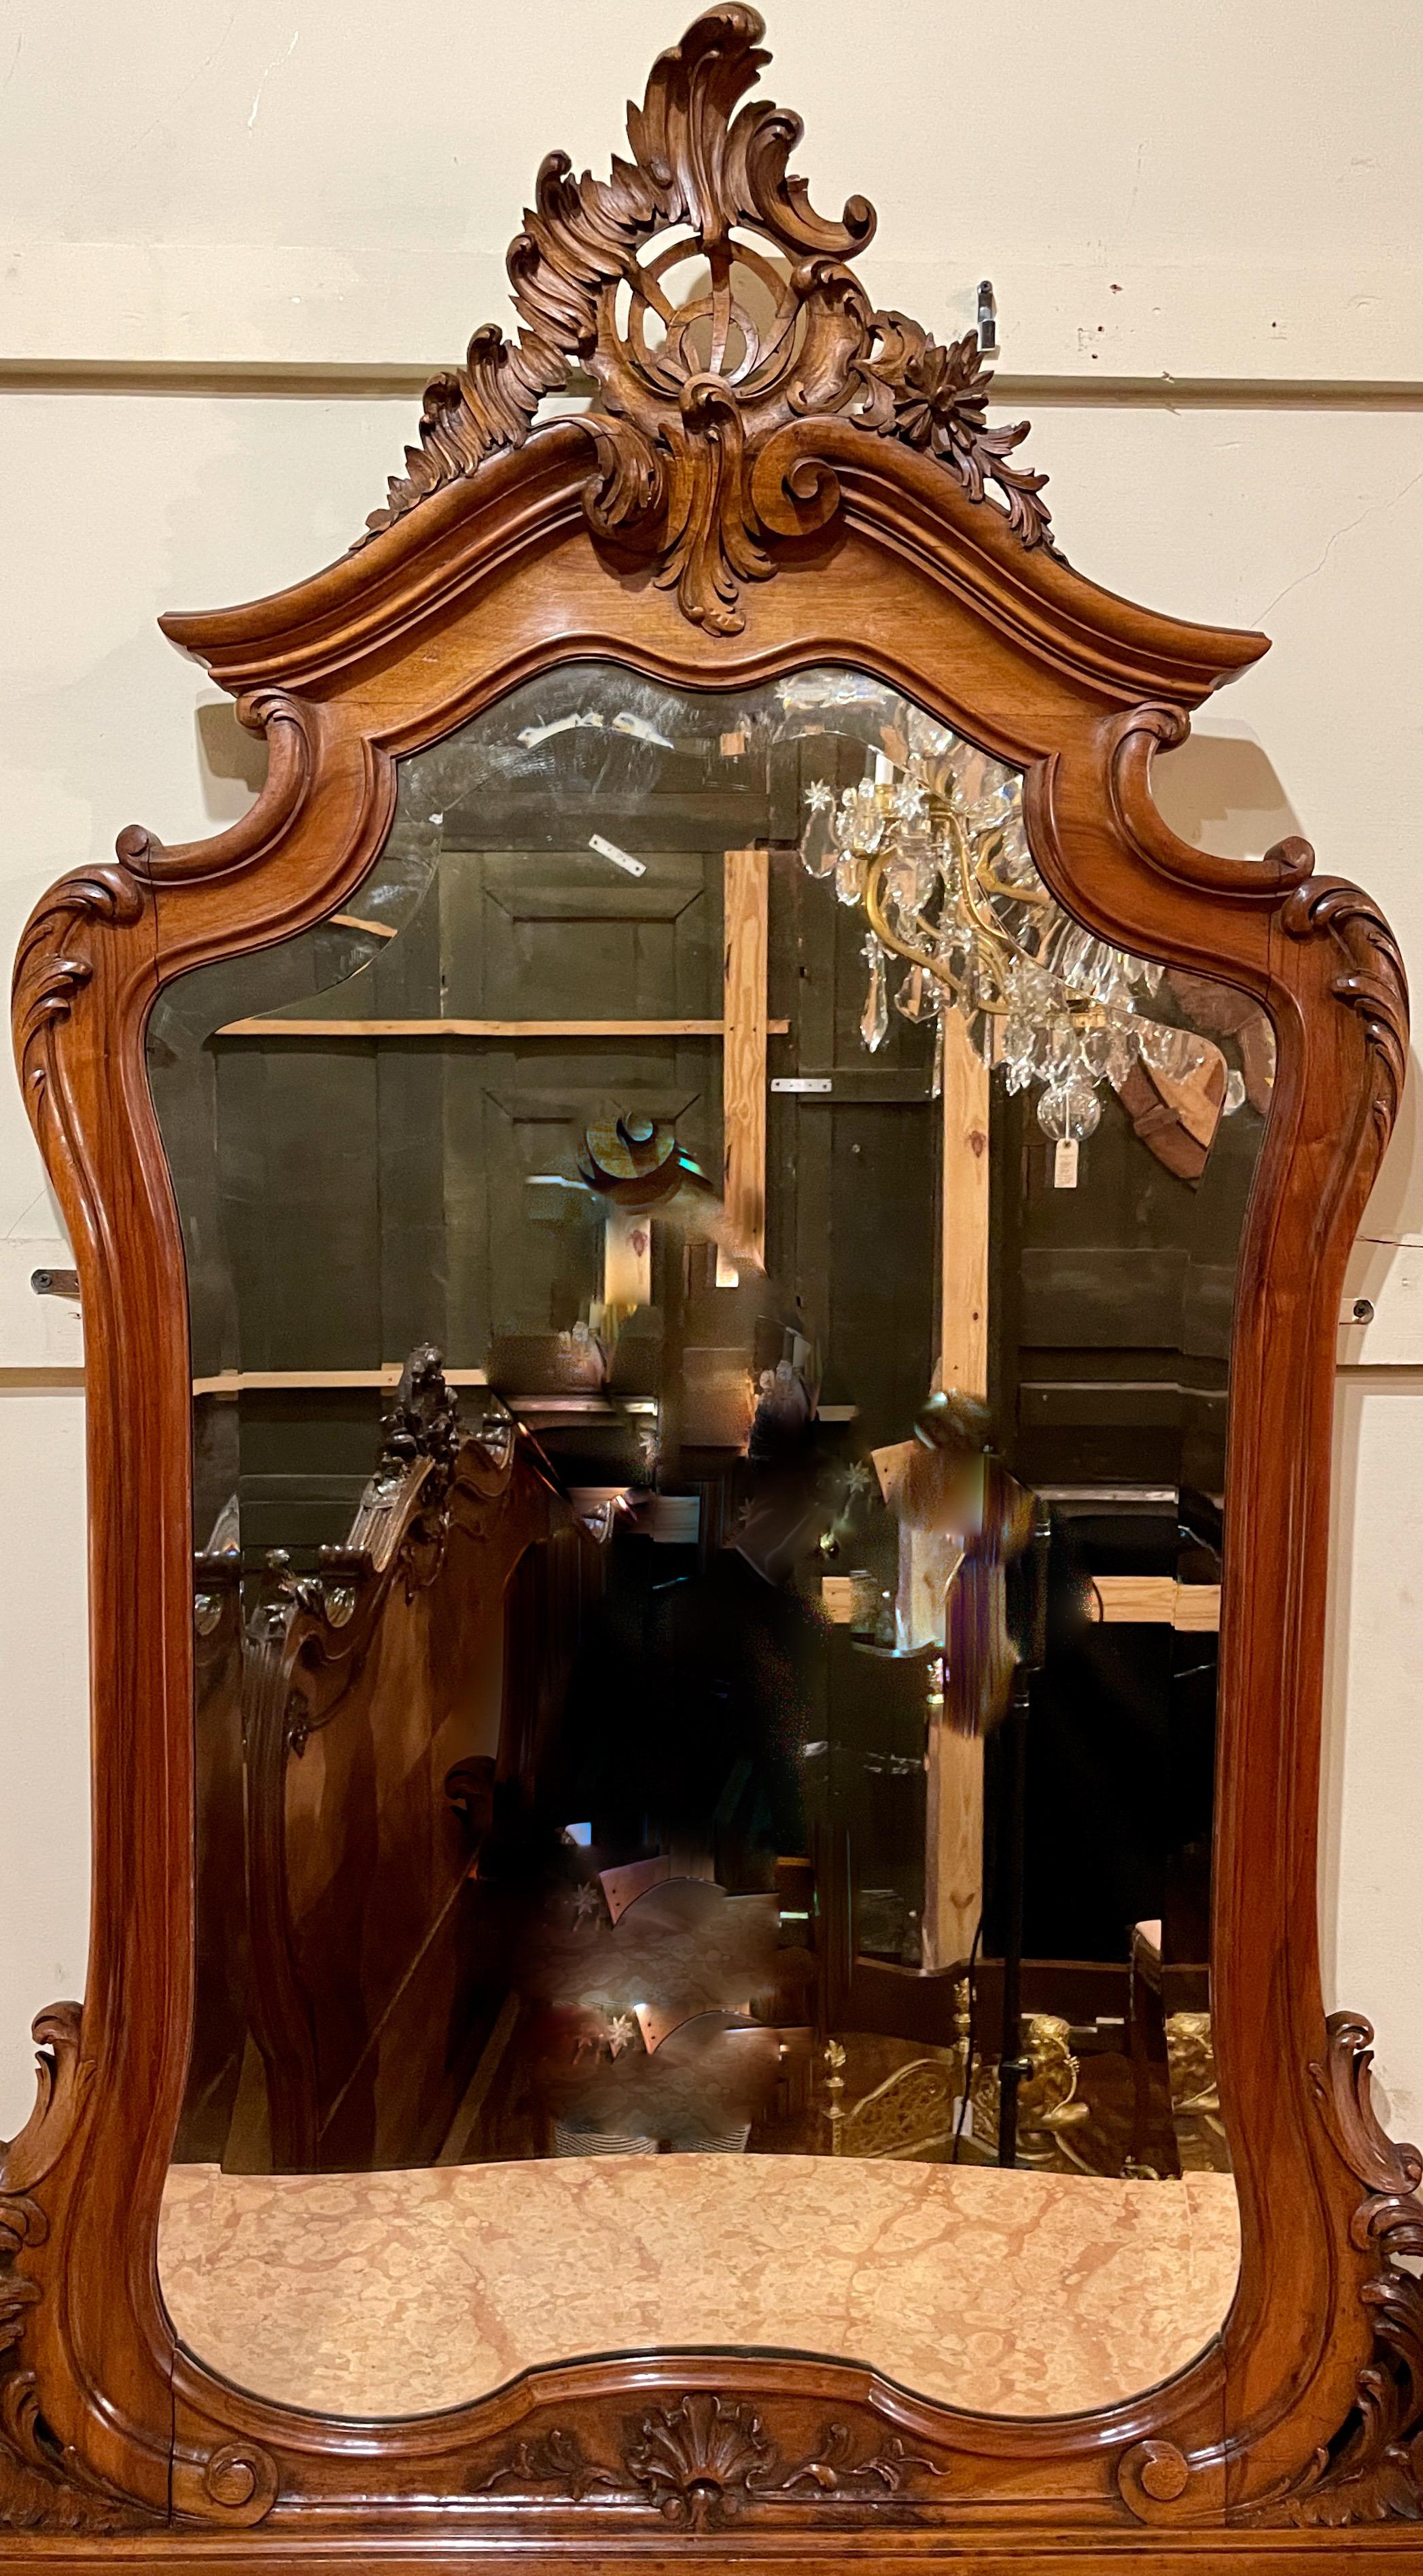 Antique handsome walnut and marble bombè chest of drawers with beveled mirror, circa 1885-1895.